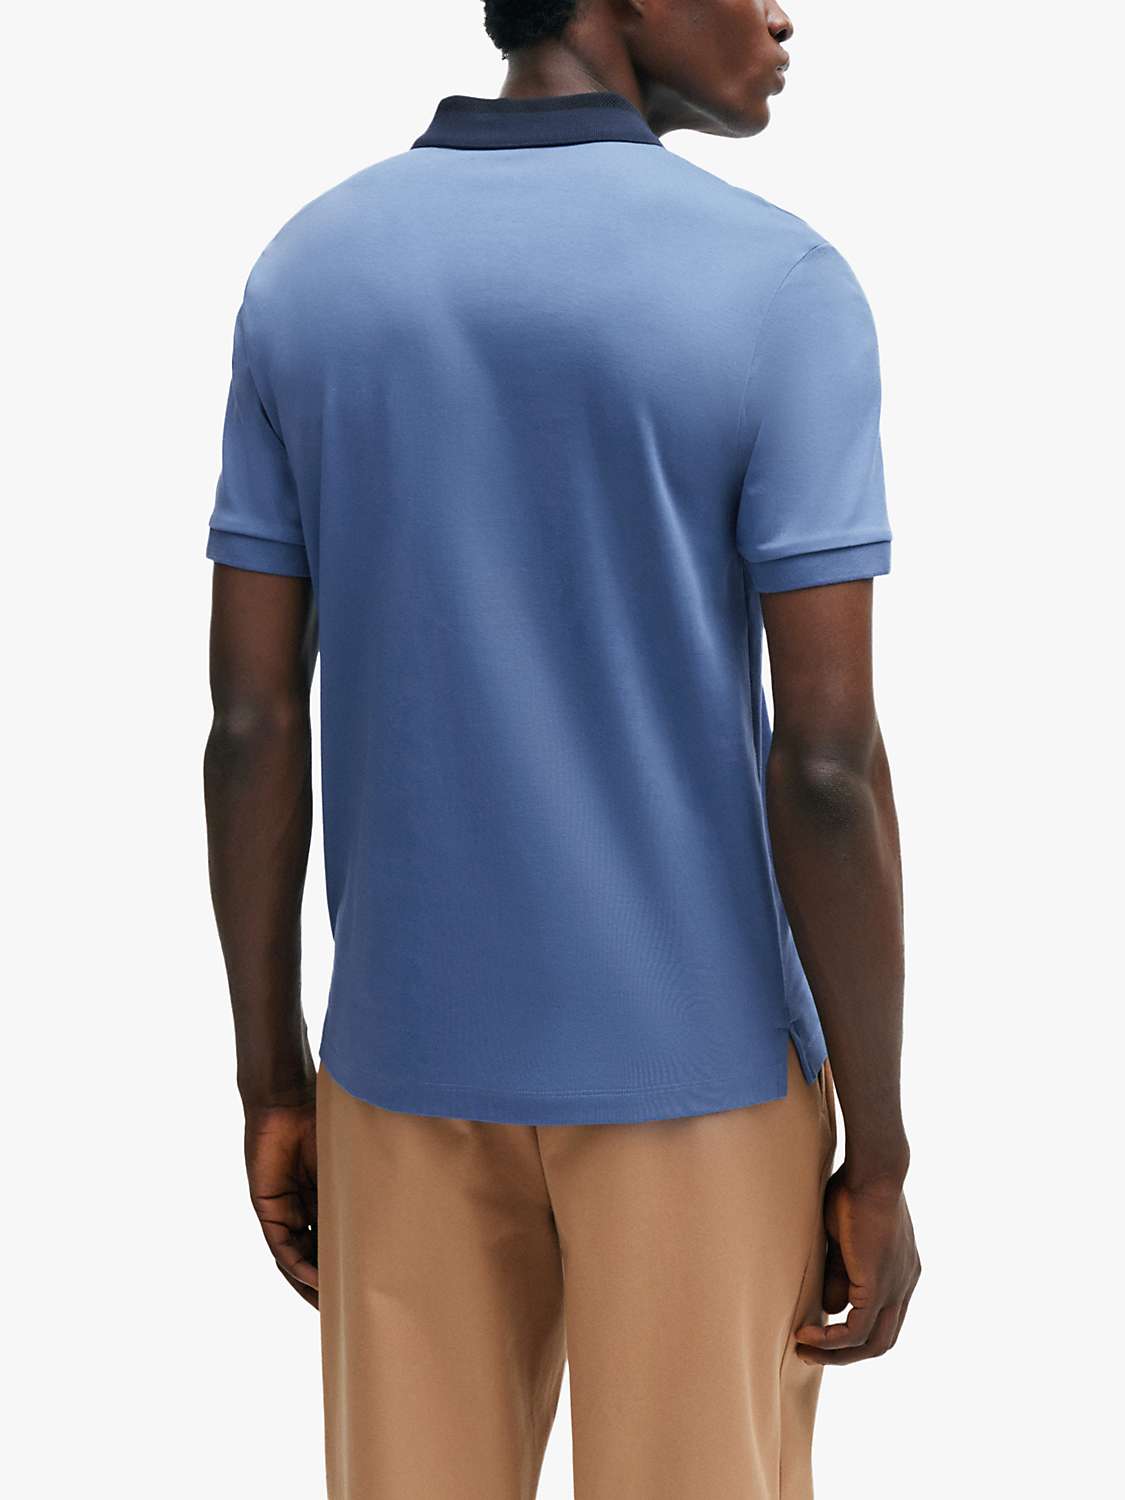 Buy BOSS Phillipson Cotton Polo Shirt, Blue Online at johnlewis.com